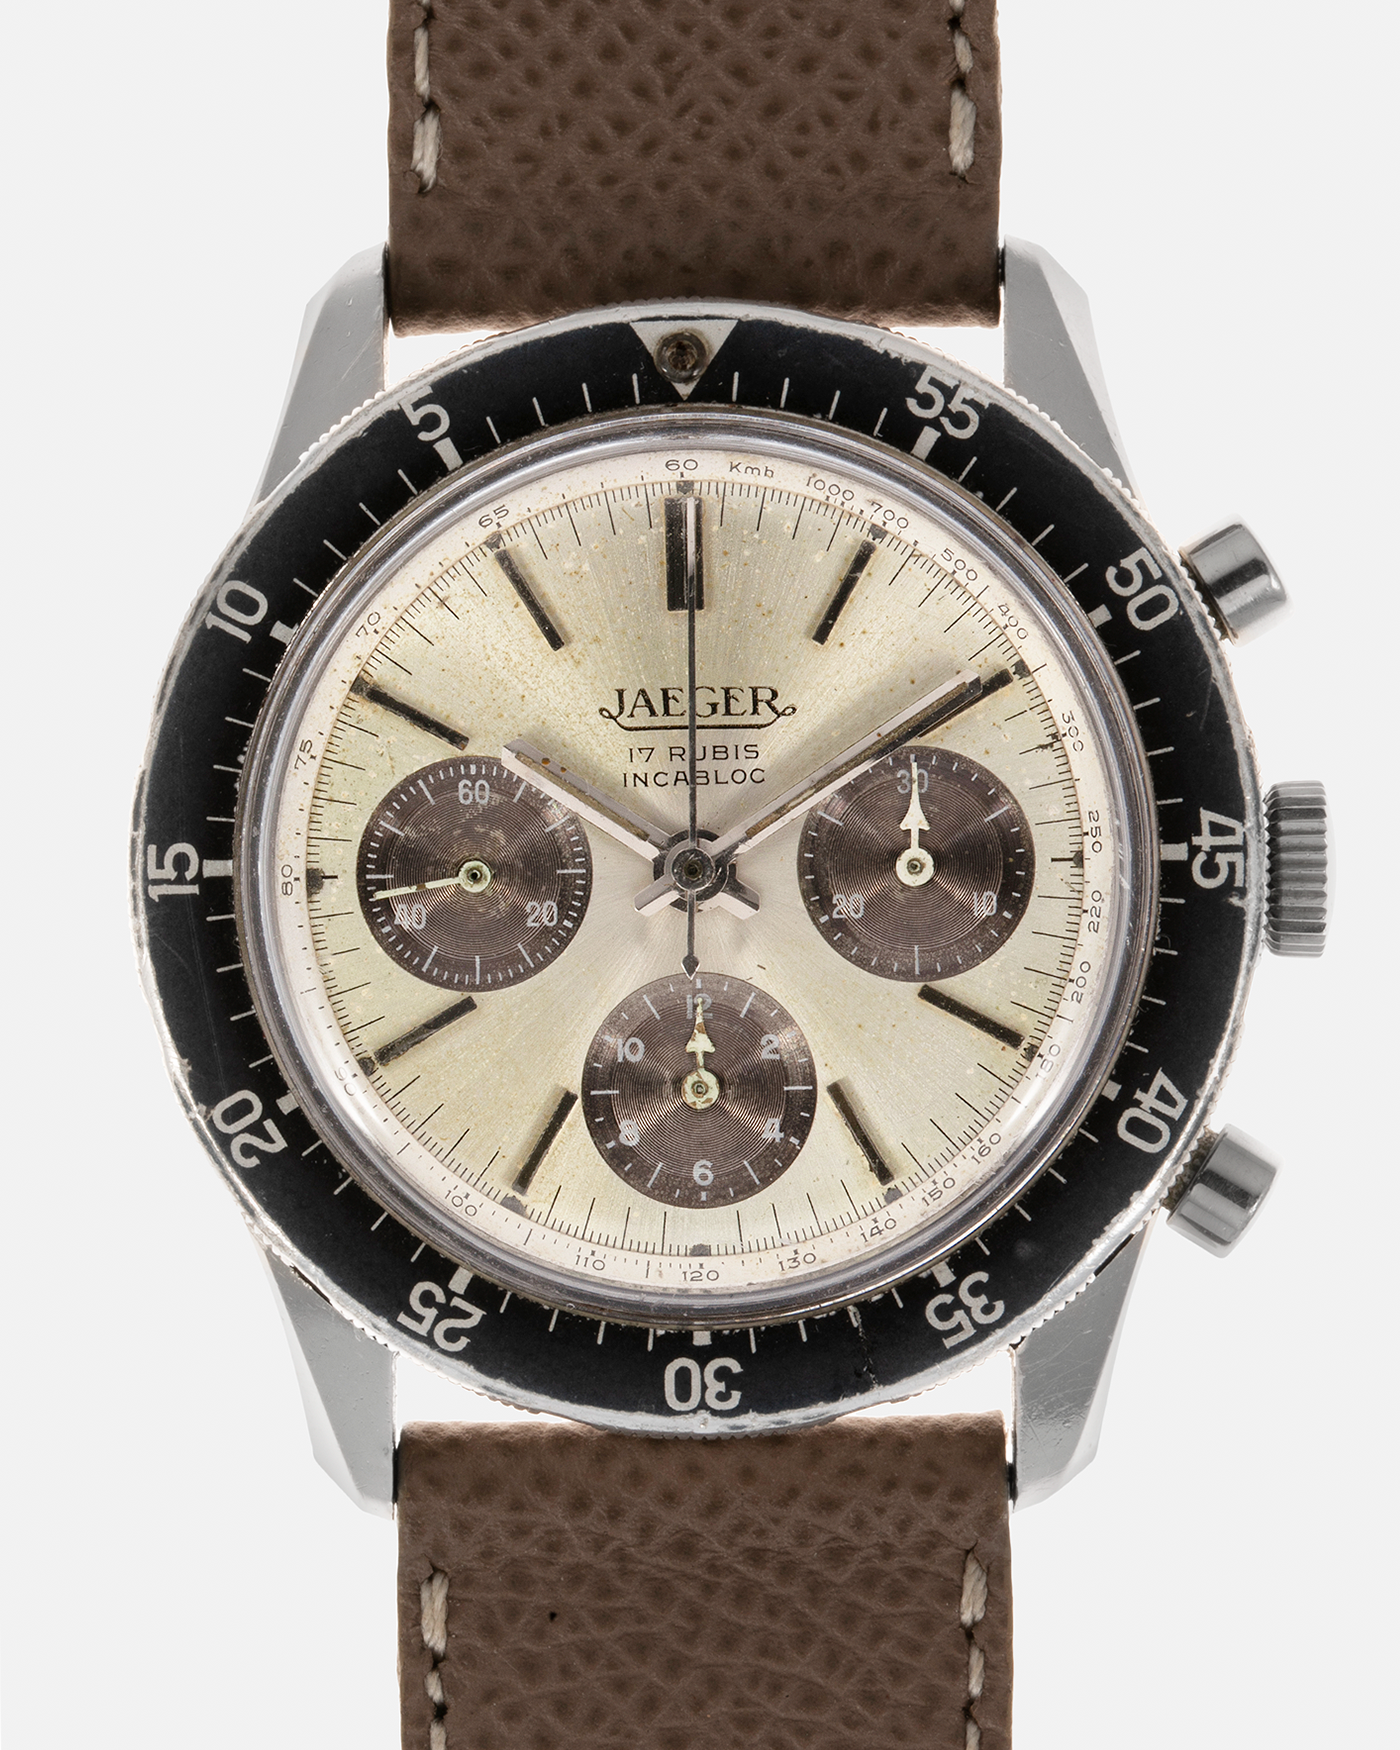 Brand: Jaeger Year: 1968 Model: 4 ATM Reference Number: E.13001 Serial Number: 442745 Material: Stainless Steel Movement: Valjoux Cal. 72, Manual-Winding Case Diameter: 41mm Lug Width: 22mm Strap: Generic Taupe Leather Strap